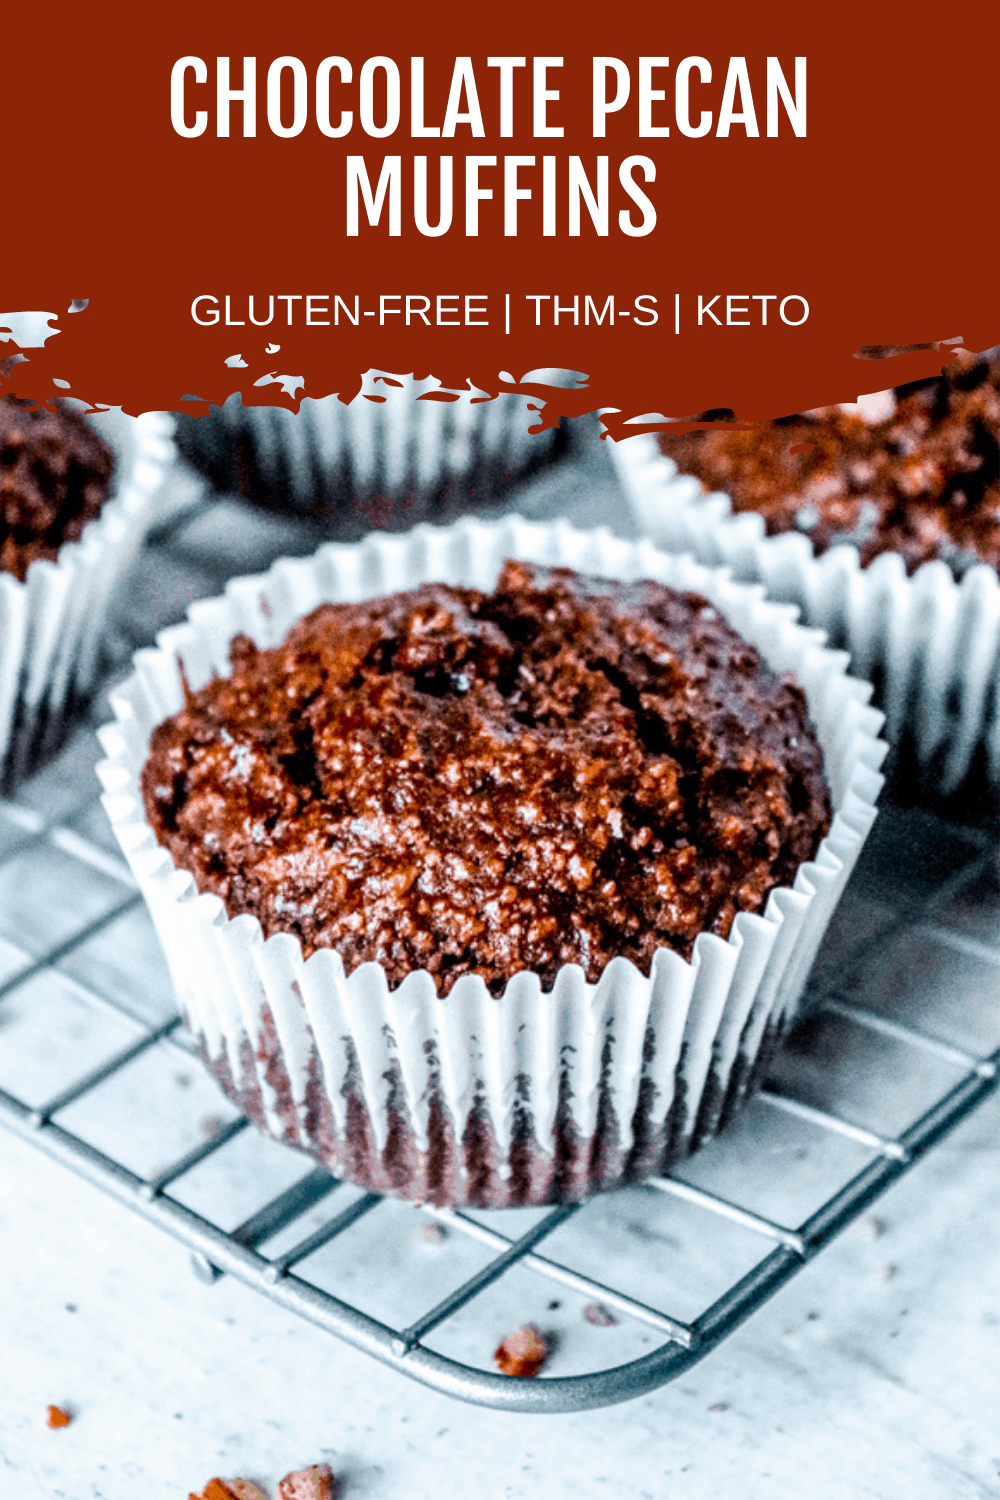 Keto Chocolate Muffins made with almond flour and studded with pecans. Delicious, chocolatey, sugar-free chocolate muffins that everyone will love. #sugarfreemuffins #ketomuffins #lowcarbmuffins